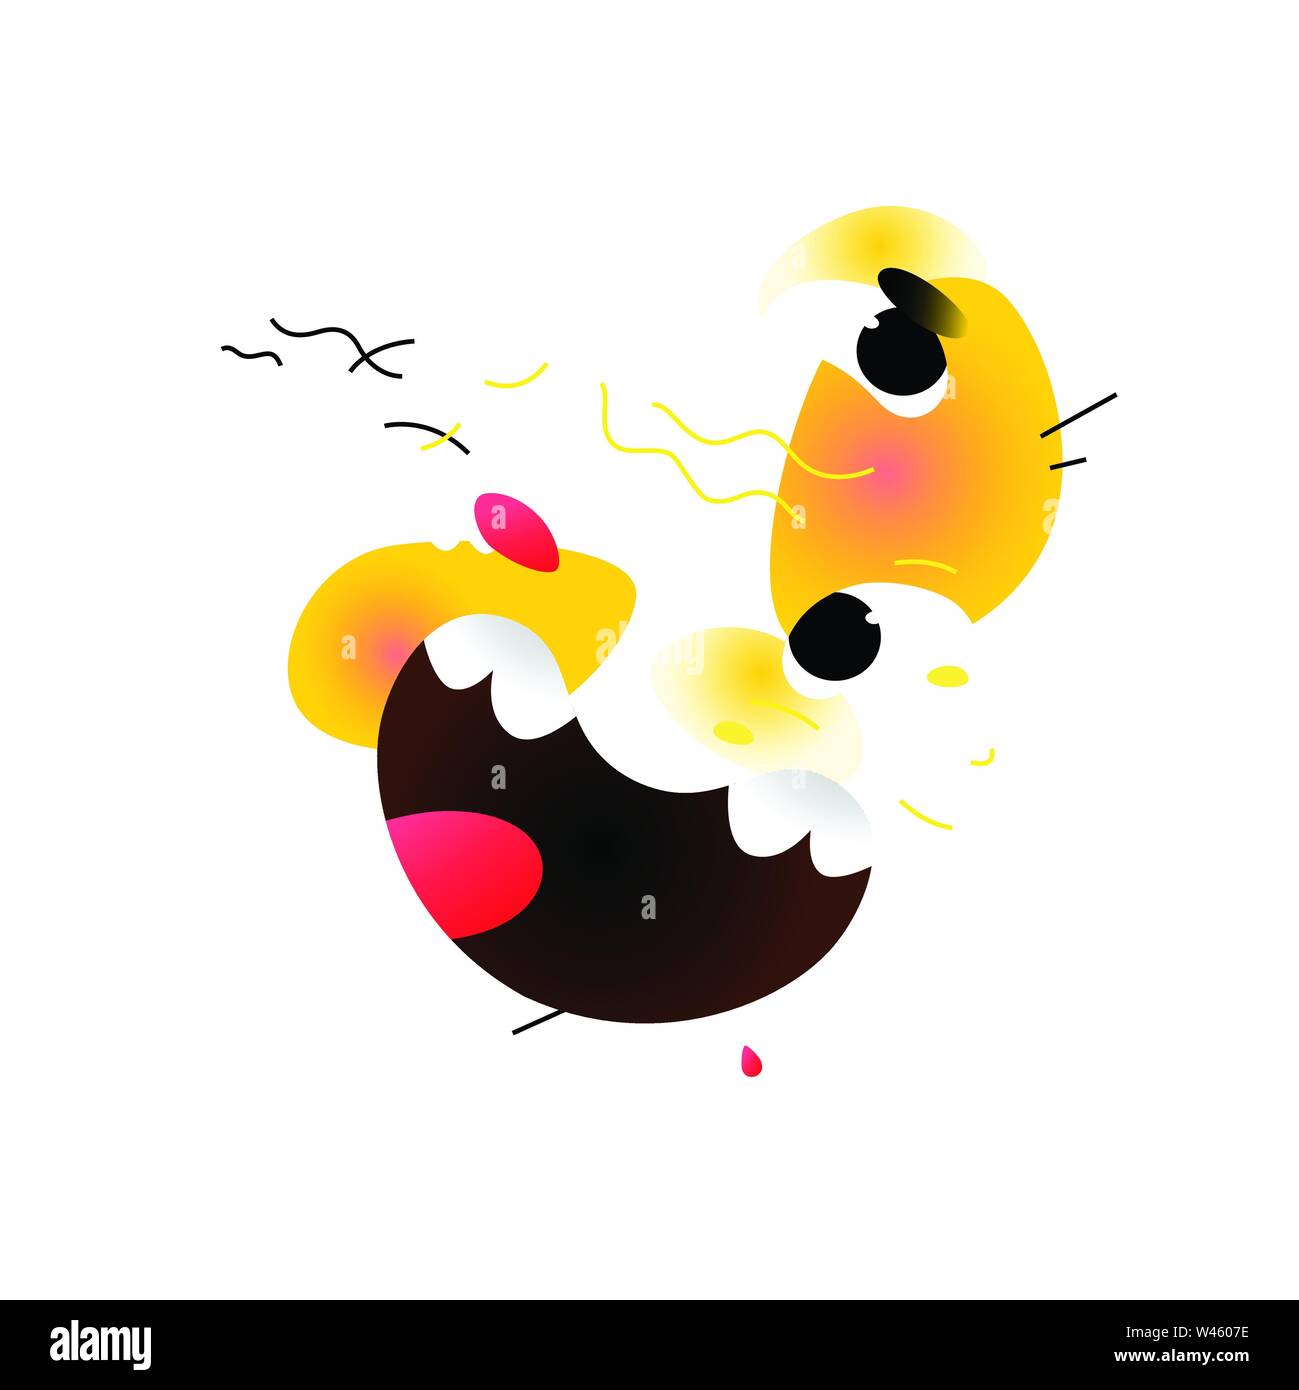 Smiley. Abstract picture. Vector. Modern Art. Avant-garde, cubism. Graffiti on the wall. Poster, interior painting. Emoji yellow face. Symbol, icon. Stock Vector